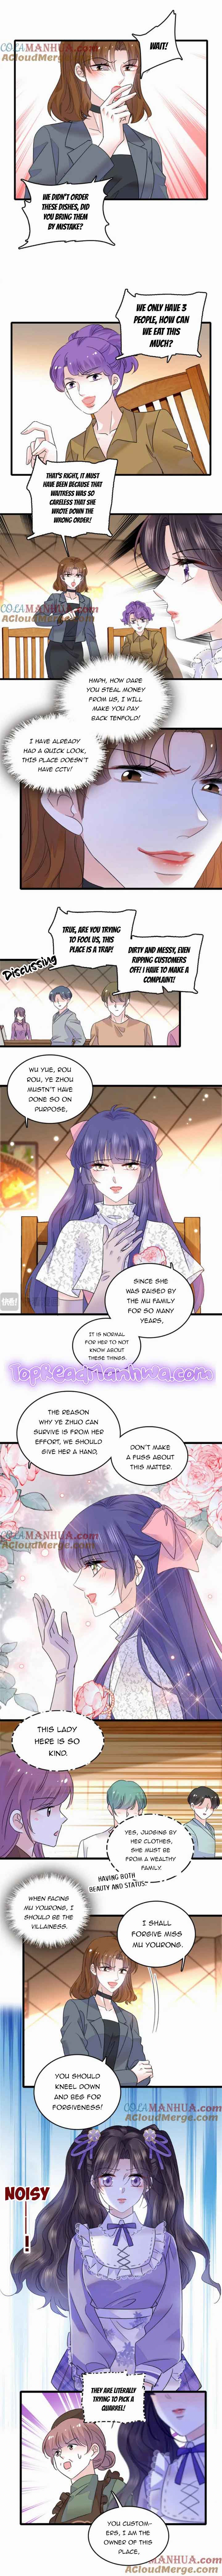 The Almighty Daughter Runs The World chapter 14